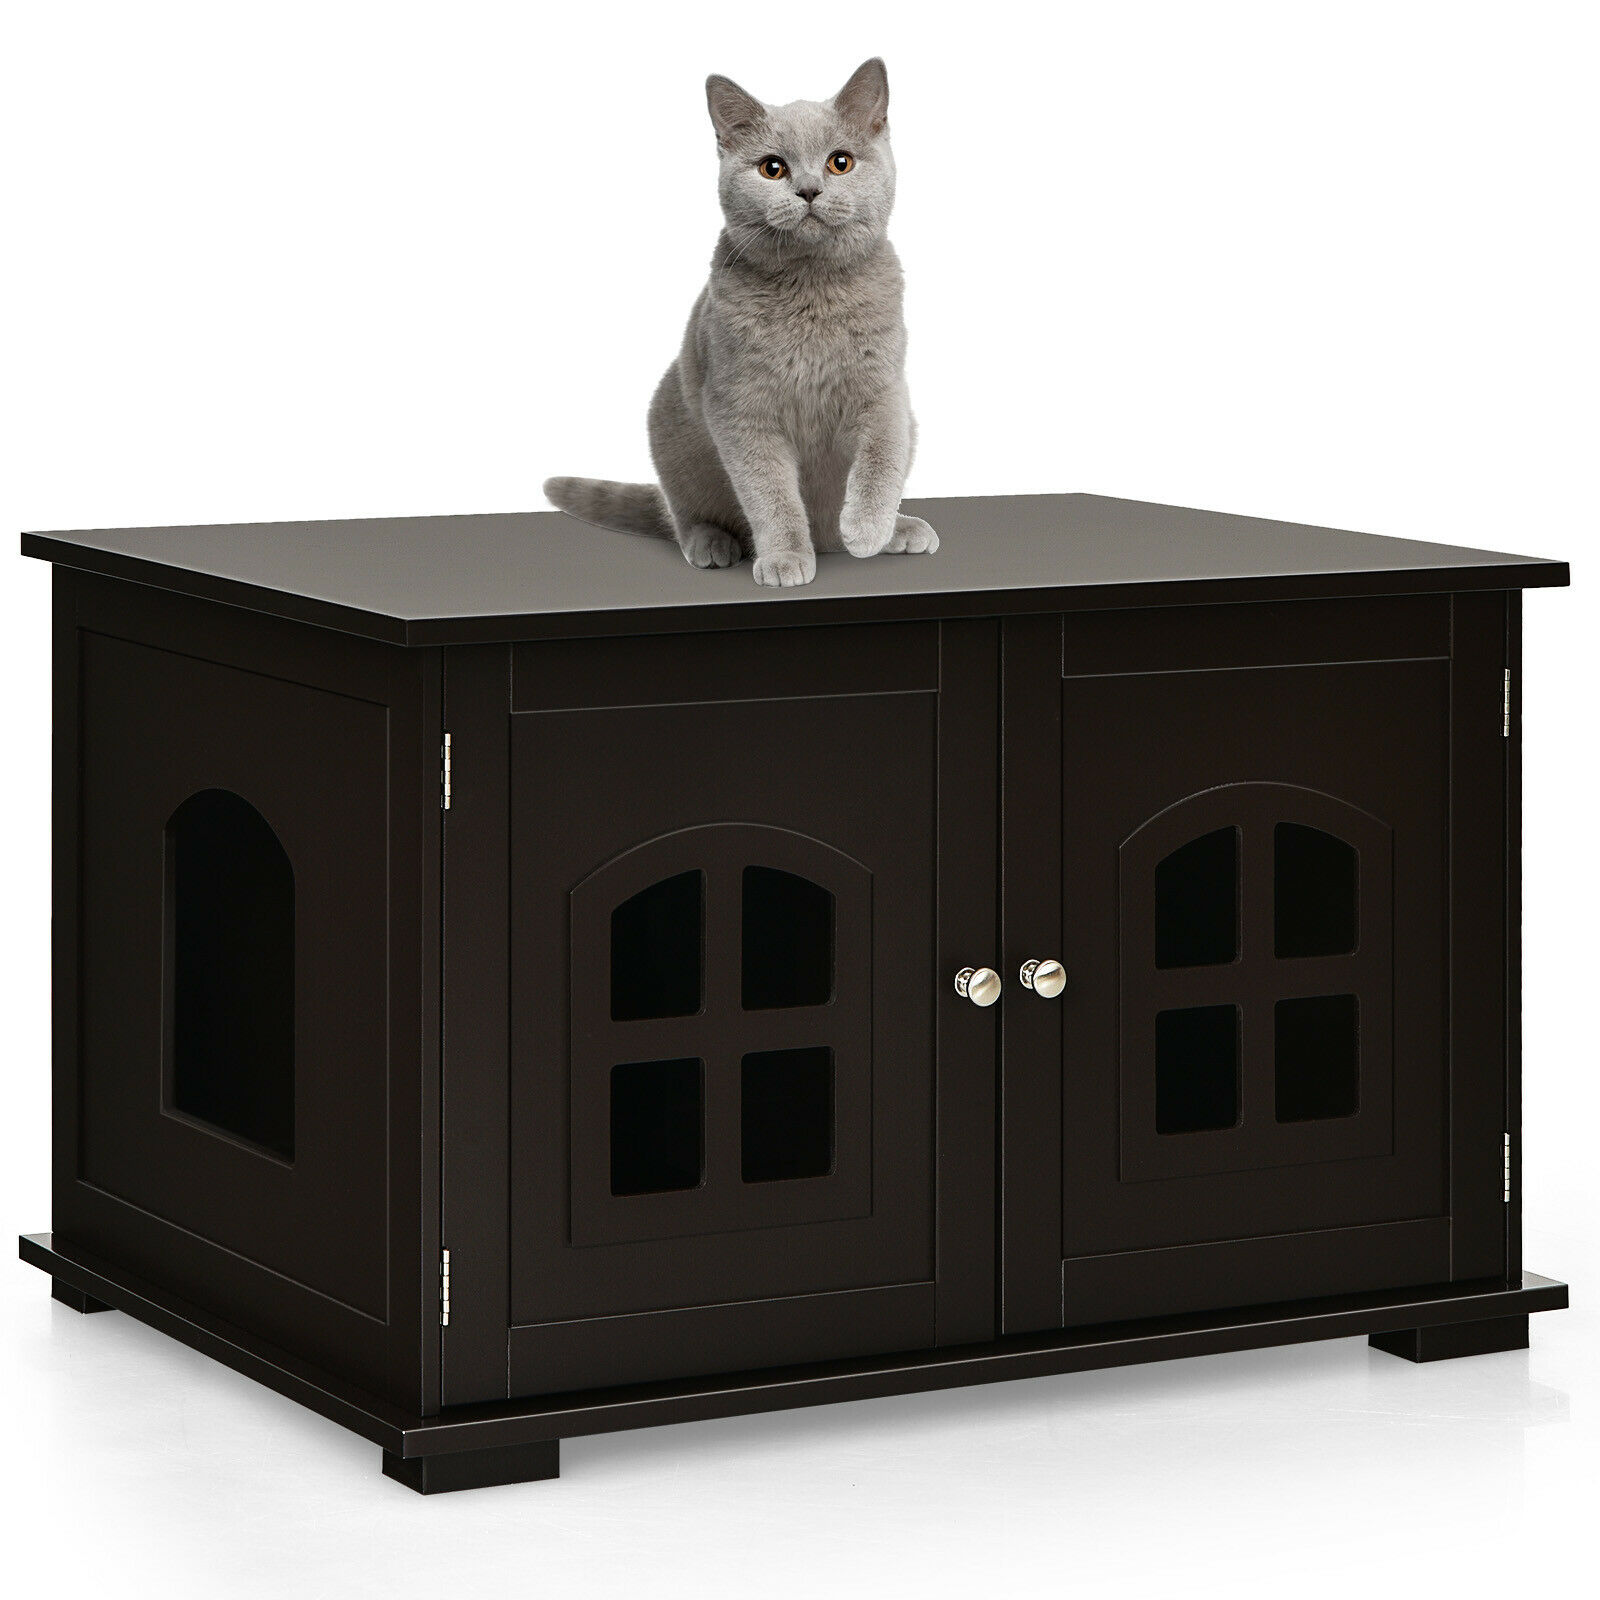 Wooden Cat Litter Box House with Double Doors and Windows